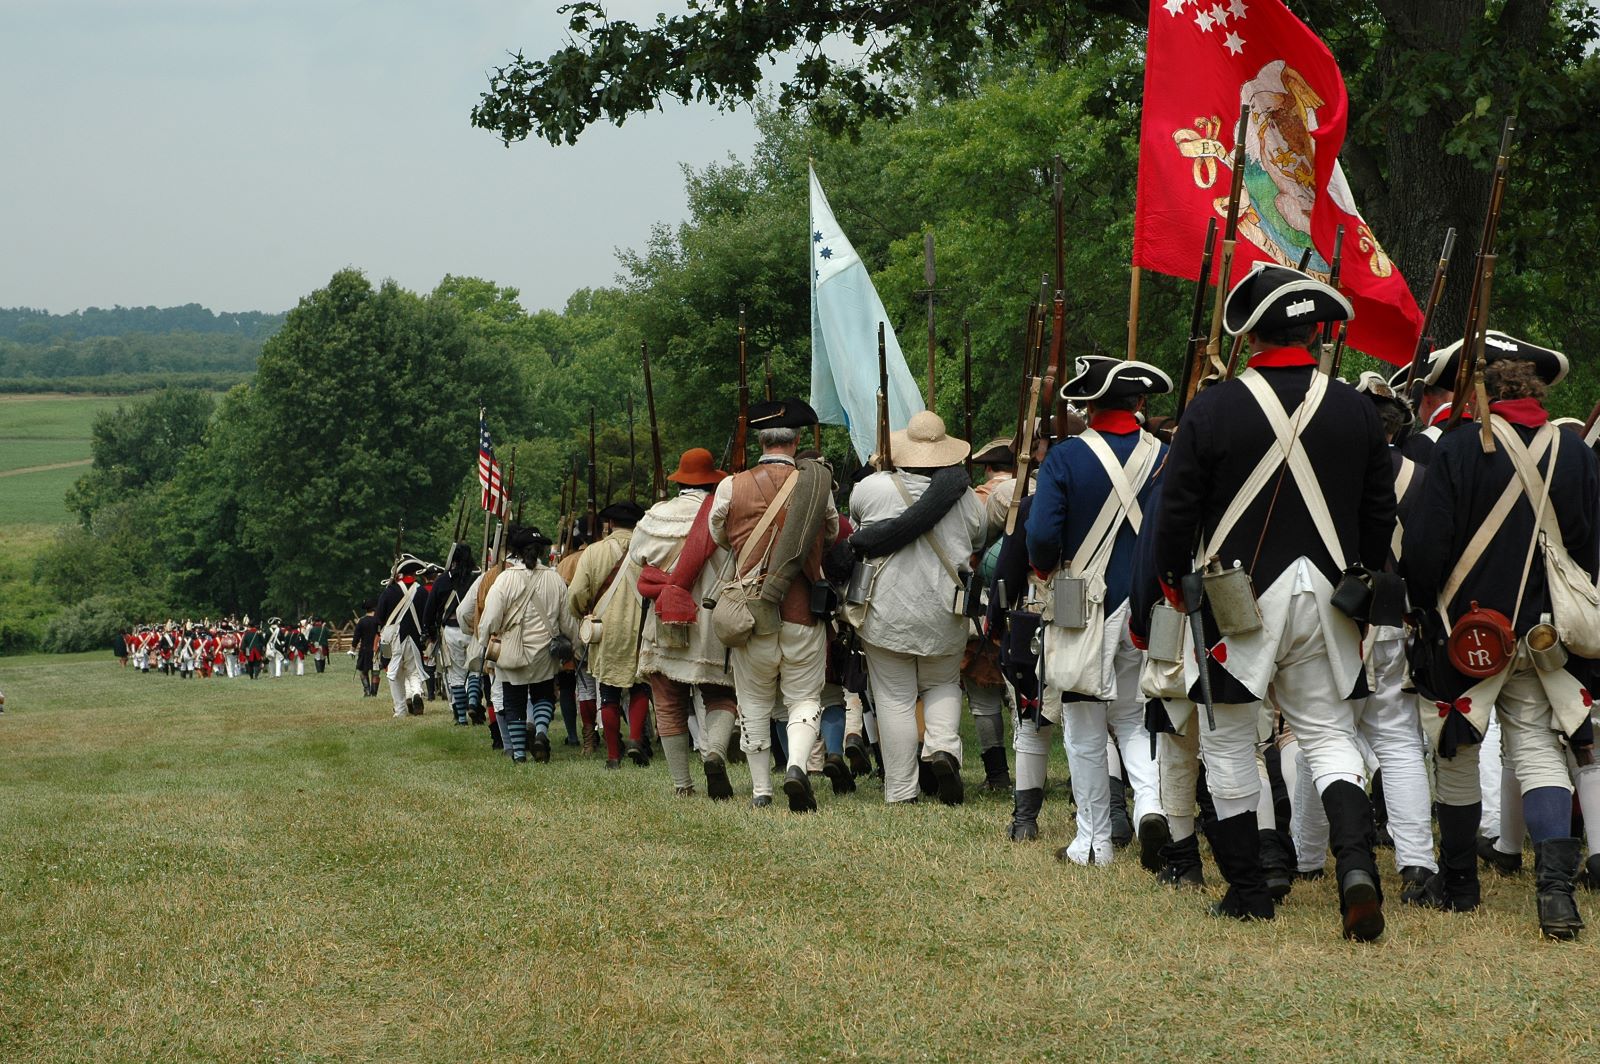 Image Credit: Shutterstock / Galina Dreyzina <p>Founded in 1783, this hereditary society includes descendants of officers from the Continental Army and their French counterparts who served in the American Revolution. It focuses on promoting historical memory and national ideals.</p>